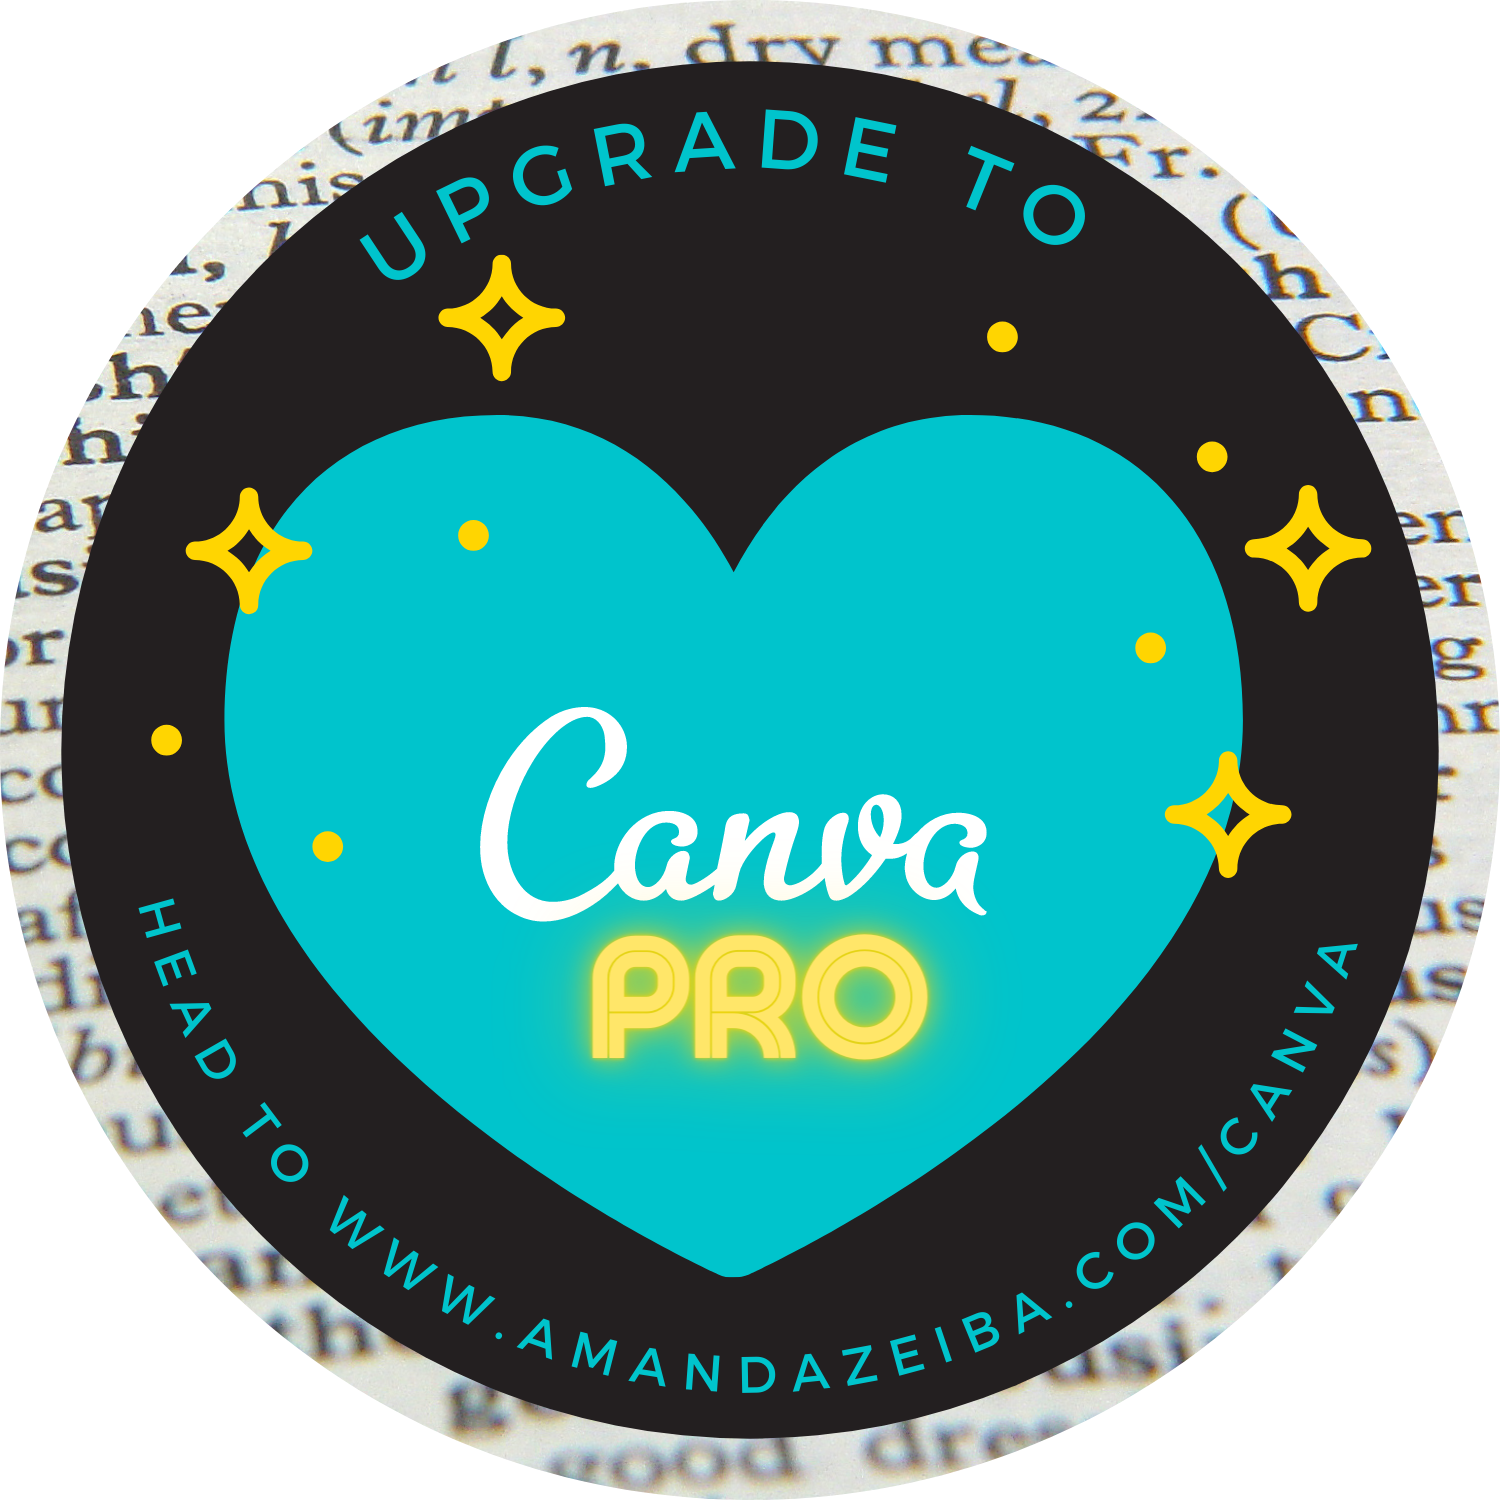 Don't Wait! Upgrade to Canva Pro Today!